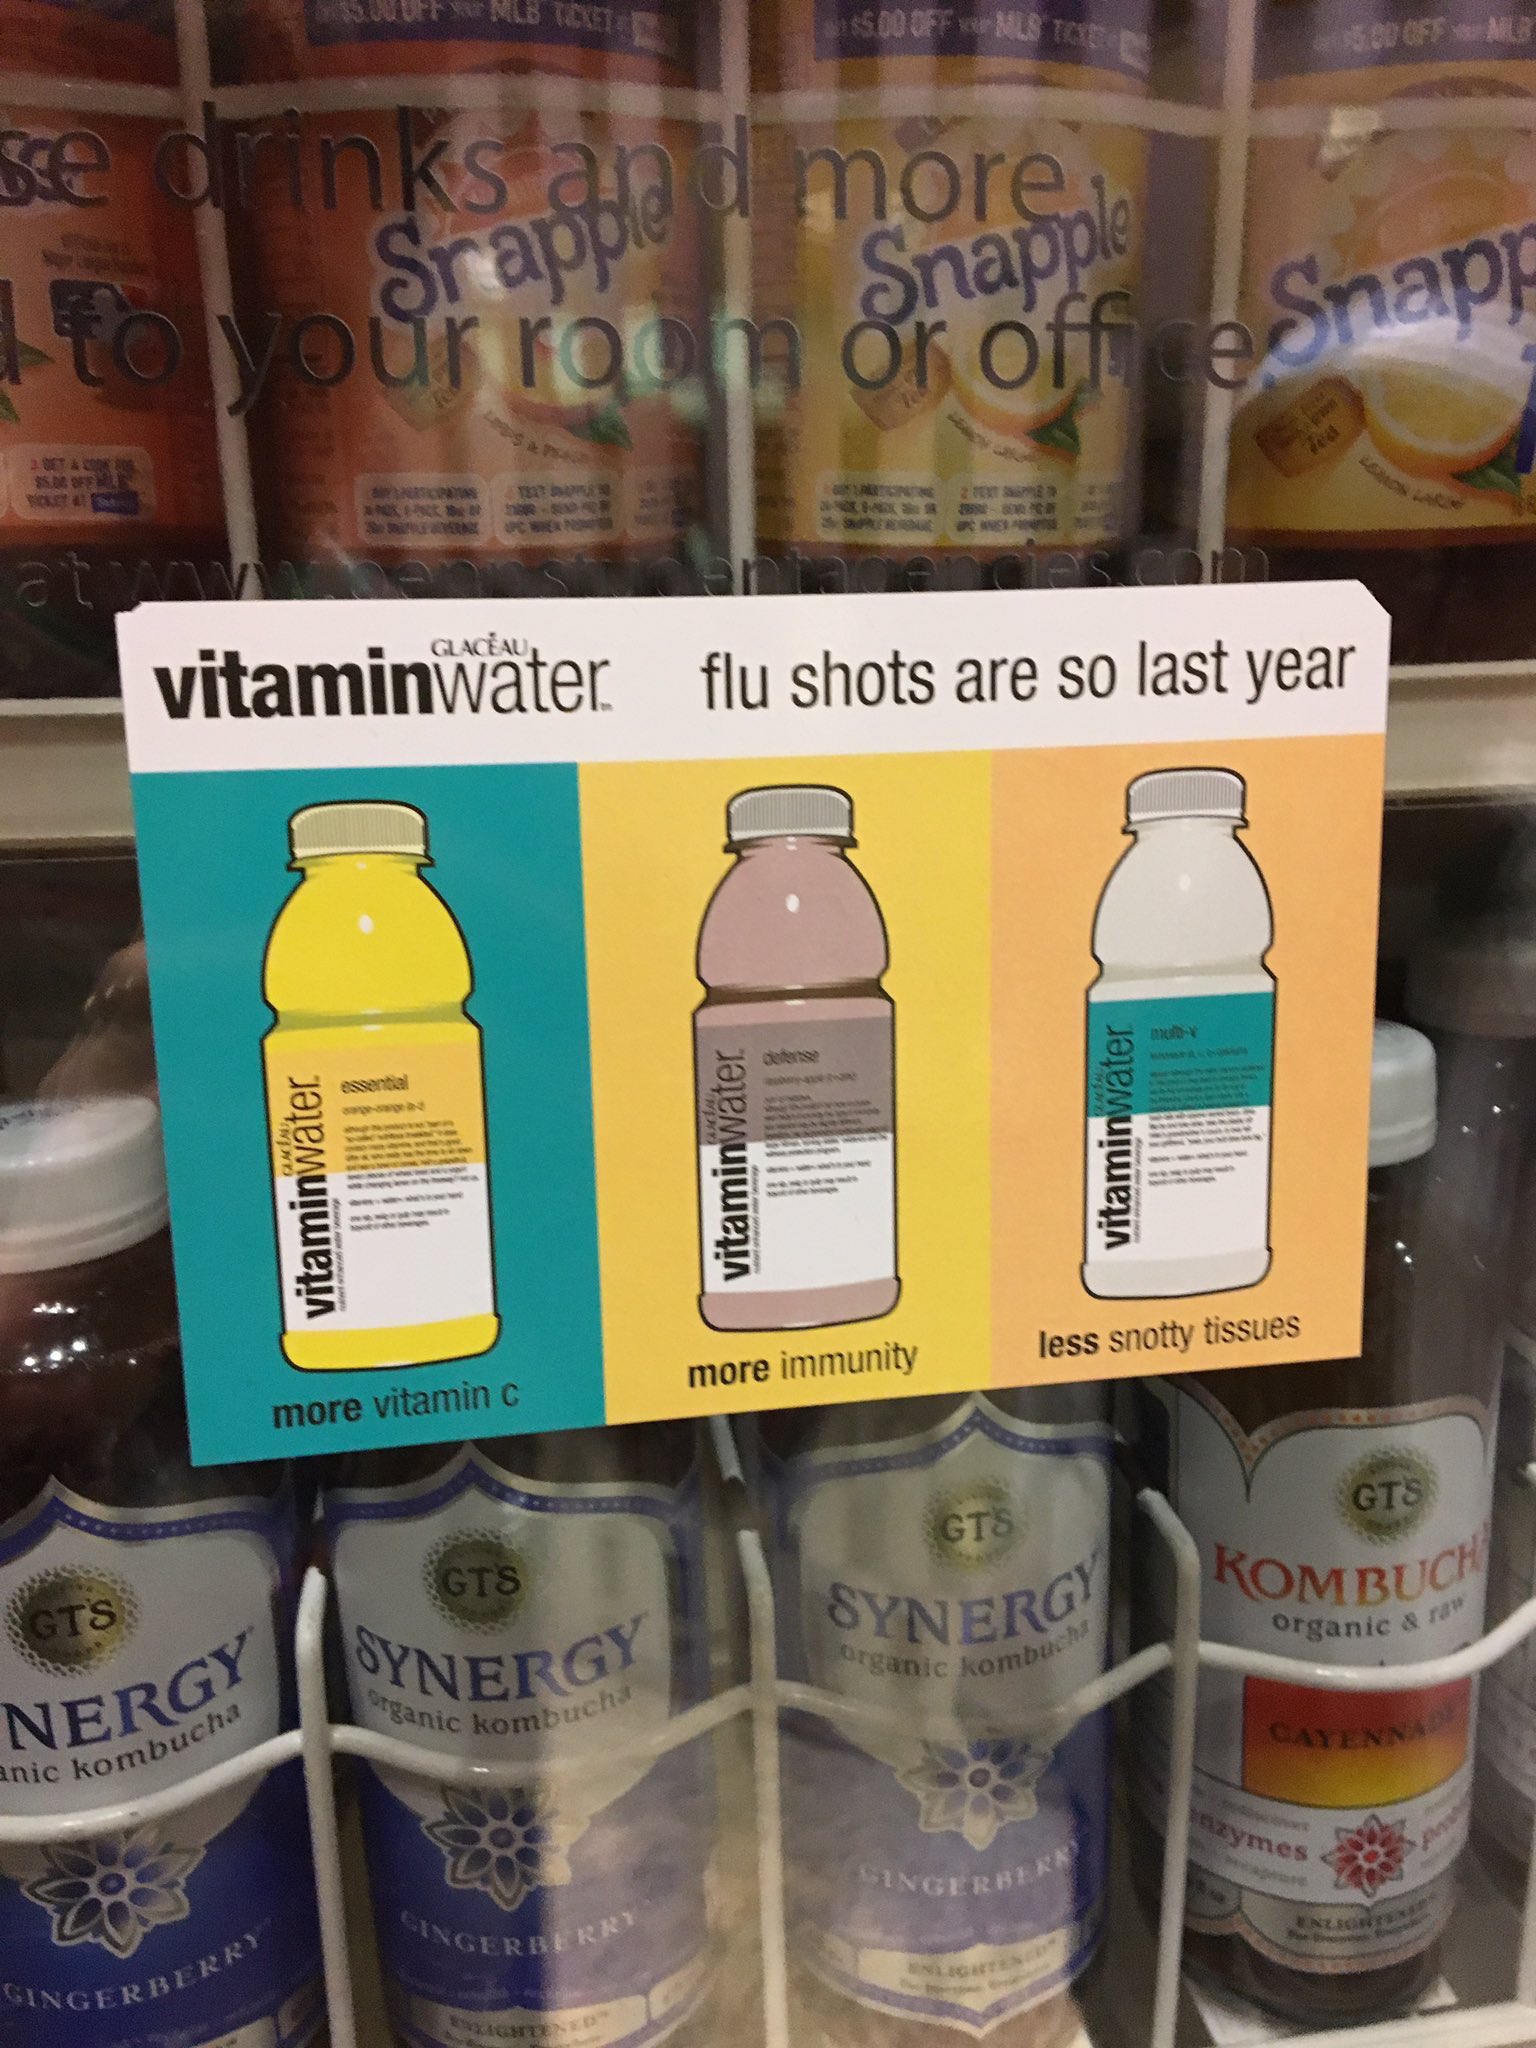 vitamin water - se drinks and more Snaps telur room or offer Srappe vitaminwater flu shots are so last year vitaminwater vitaminates vitamin less snoty issues more immunity more vitamin Cssynergy Bynero Kombuc Ynergy Nero nie hom